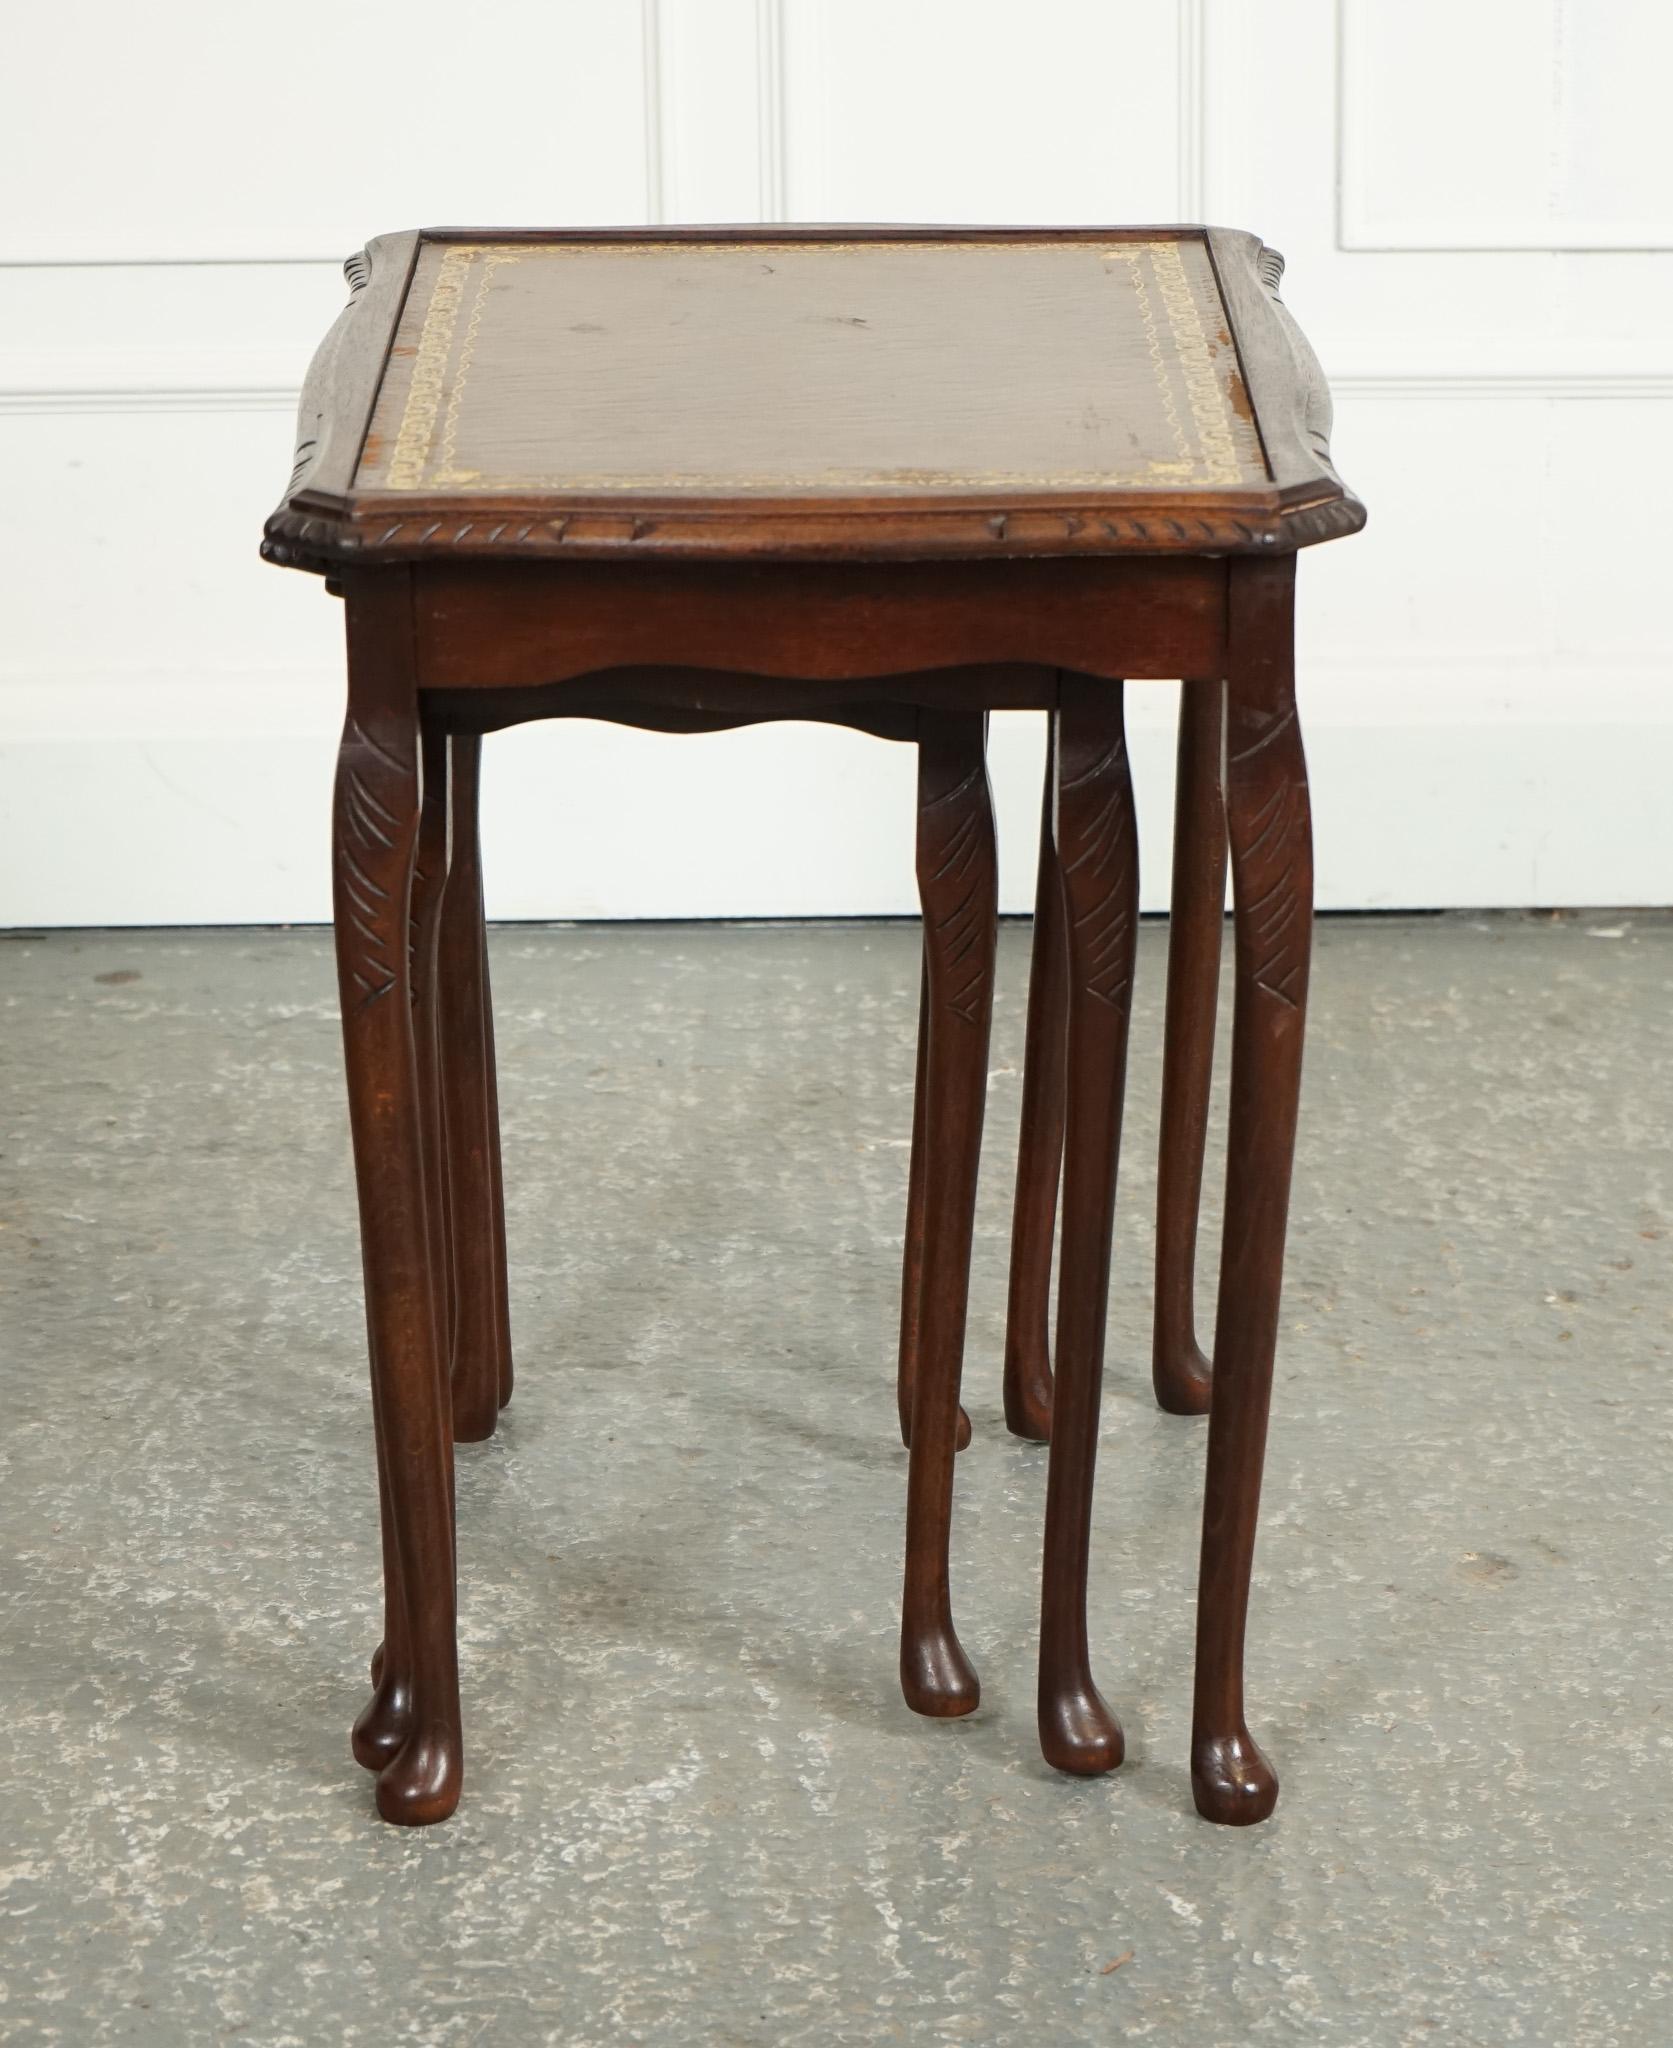 Cuir VINTAGE NEST OF TABLES QUEEN ANNE STYLE LEGS WiTH BROWN EMBOSsed LEATHER top en vente